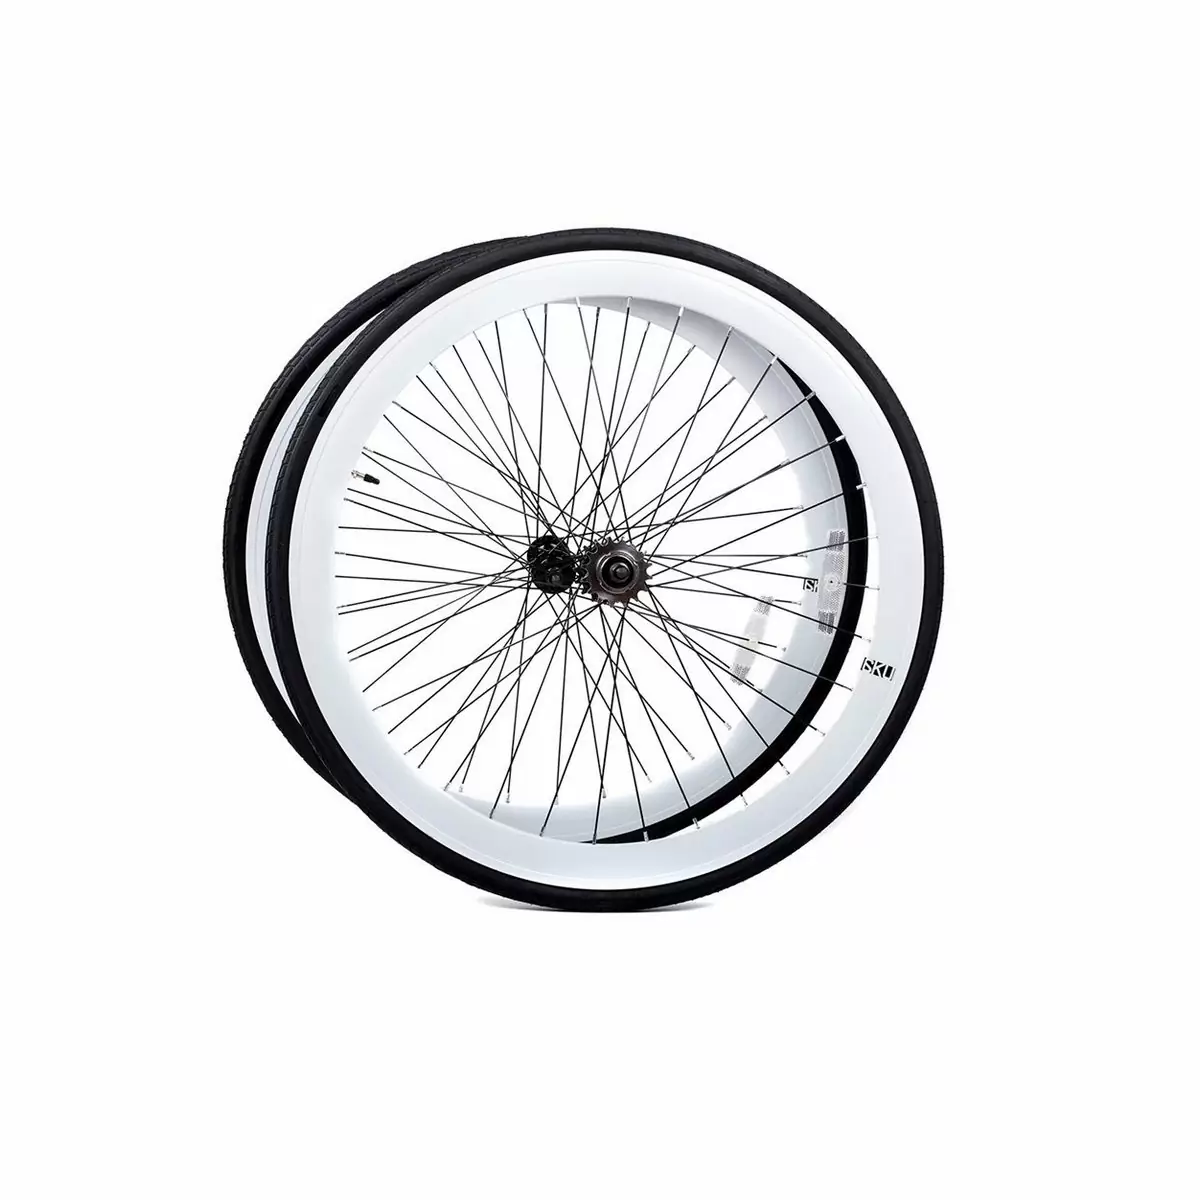 Wheelset 700c fixed gear track 30mm flip flop white - image